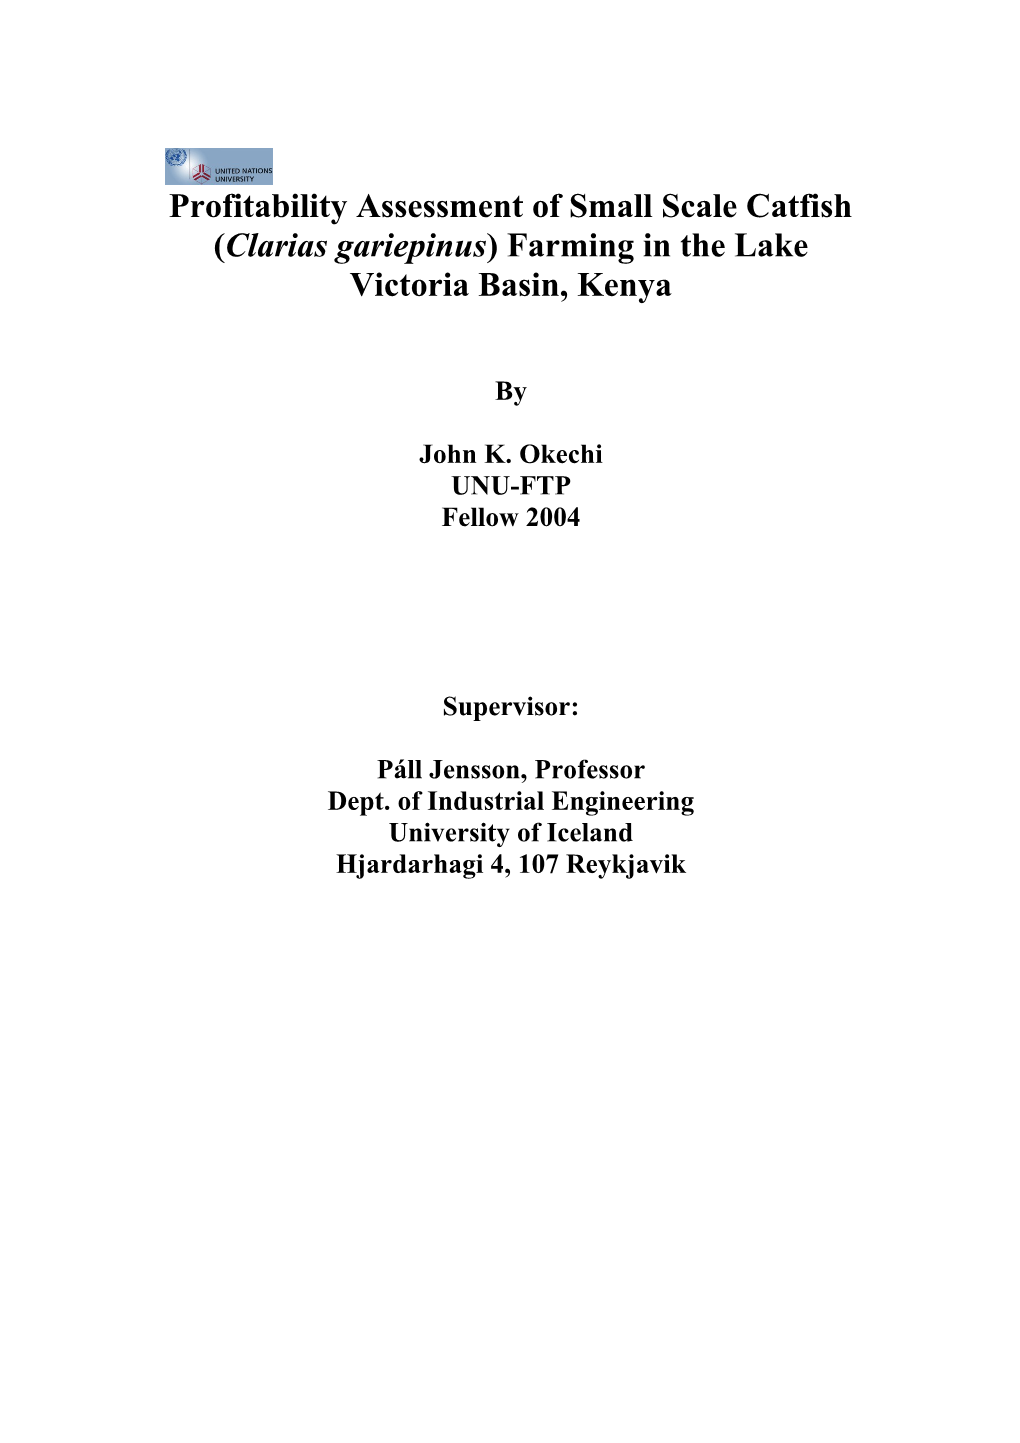 Profitability Assessment of Small Scale Catfish (Clarias Gariepinus) Farming in the Lake